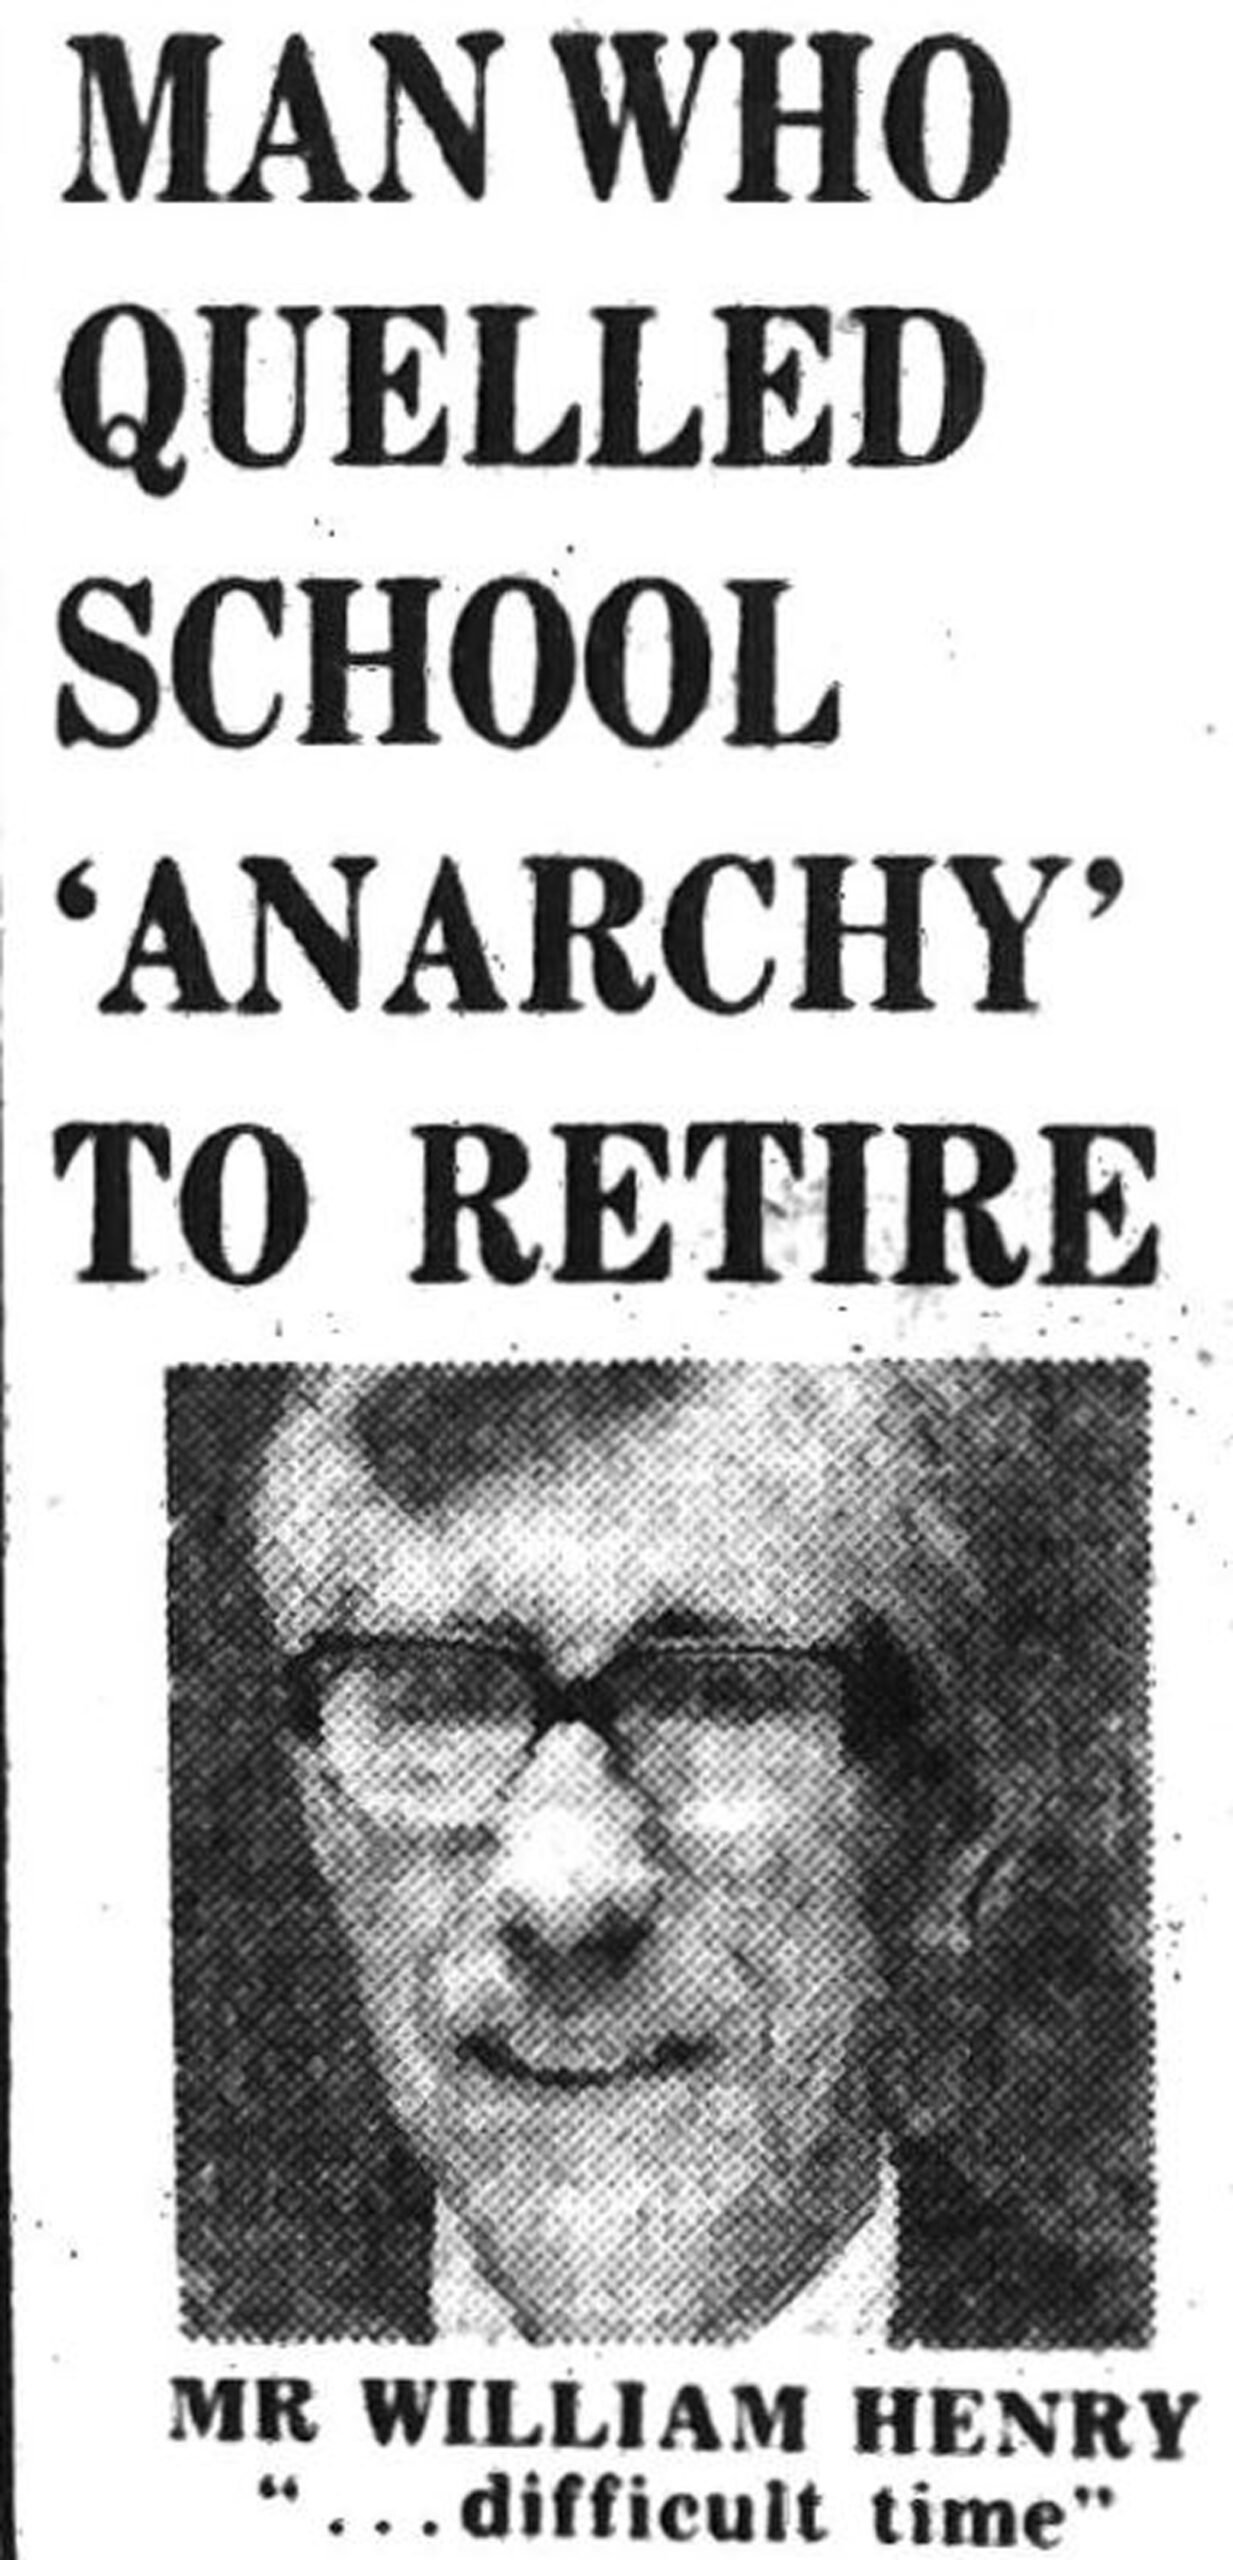 Newspaper clipping of headline: "Man who quelled school 'anarchy' to retire"